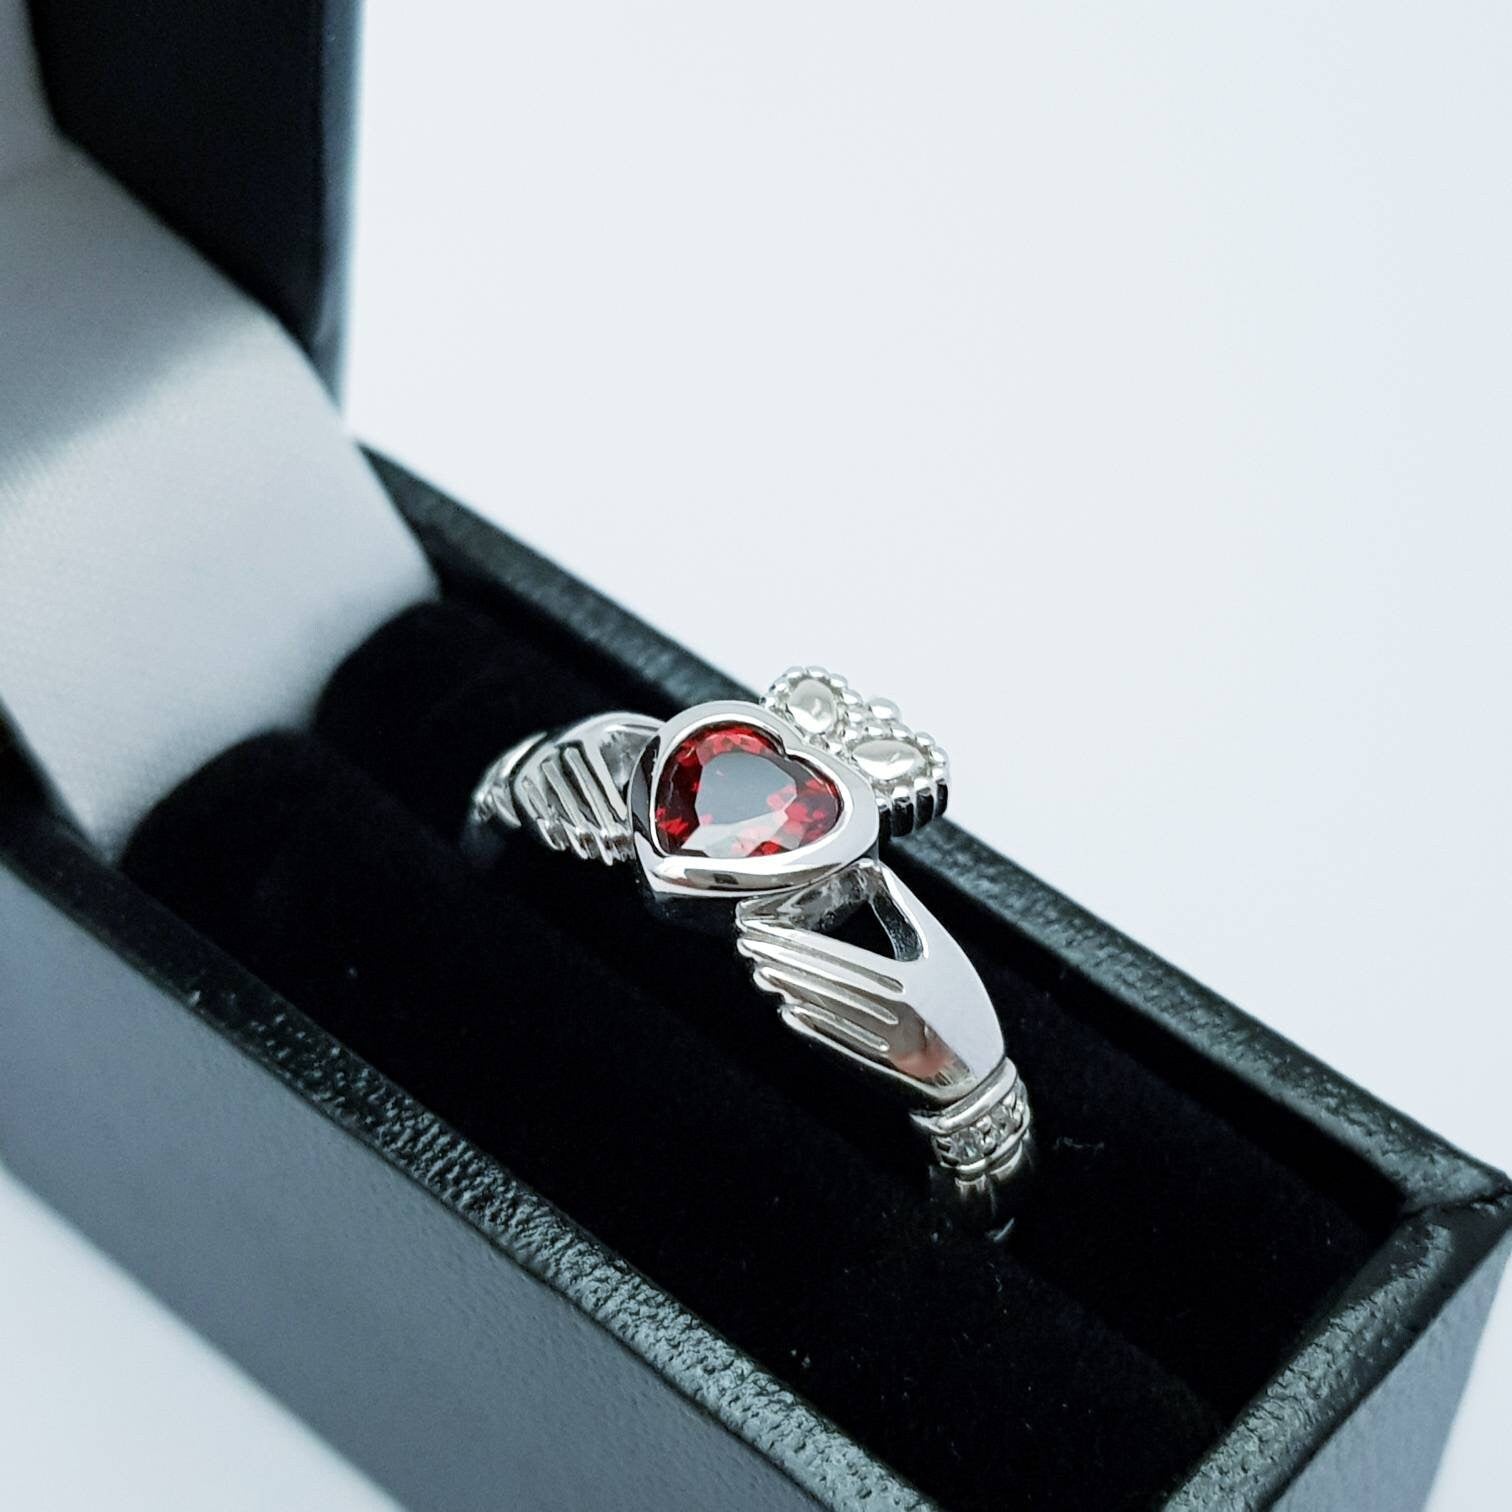 Sterling Silver Claddagh ring set with red garnet heart shaped stone, Irish claddagh rings